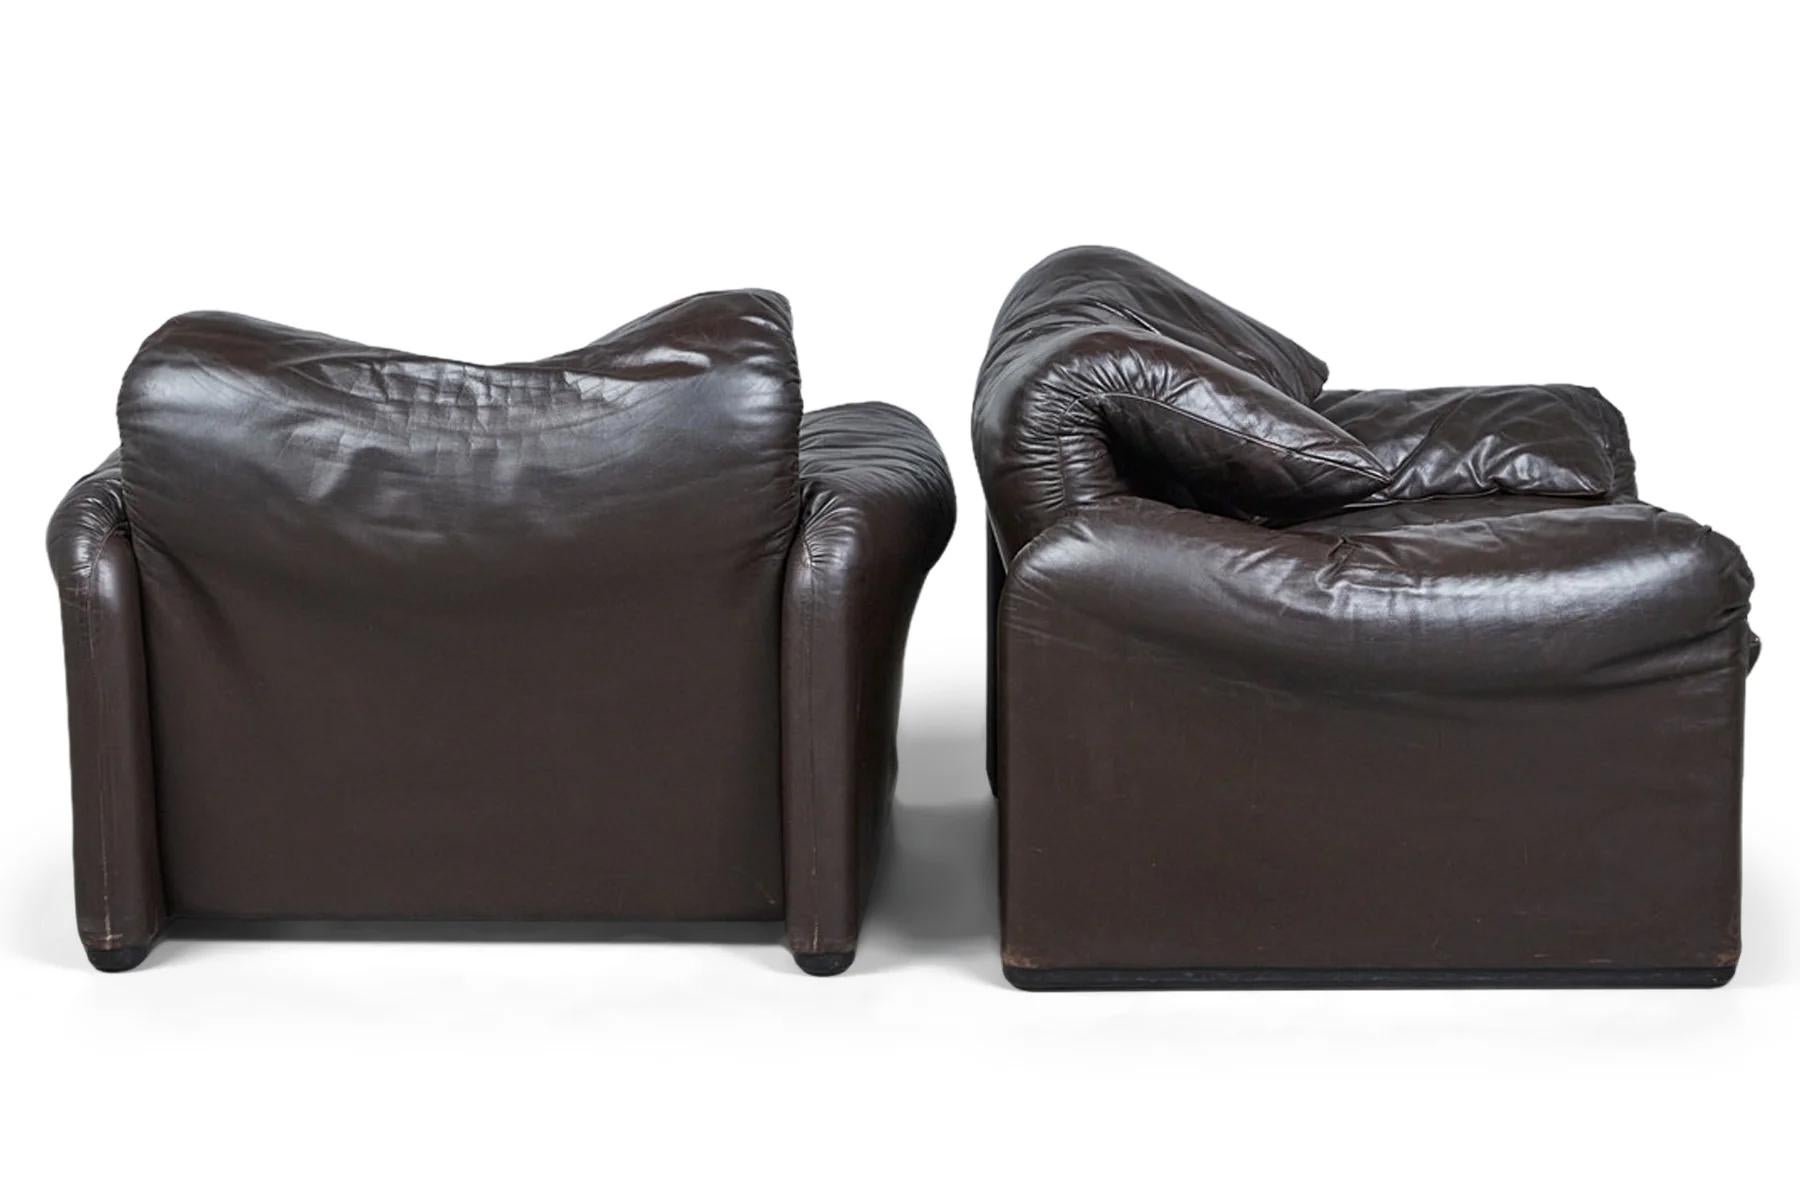 Pair of maralunga lounge chairs by vico magistretti In Good Condition For Sale In Berkeley, CA